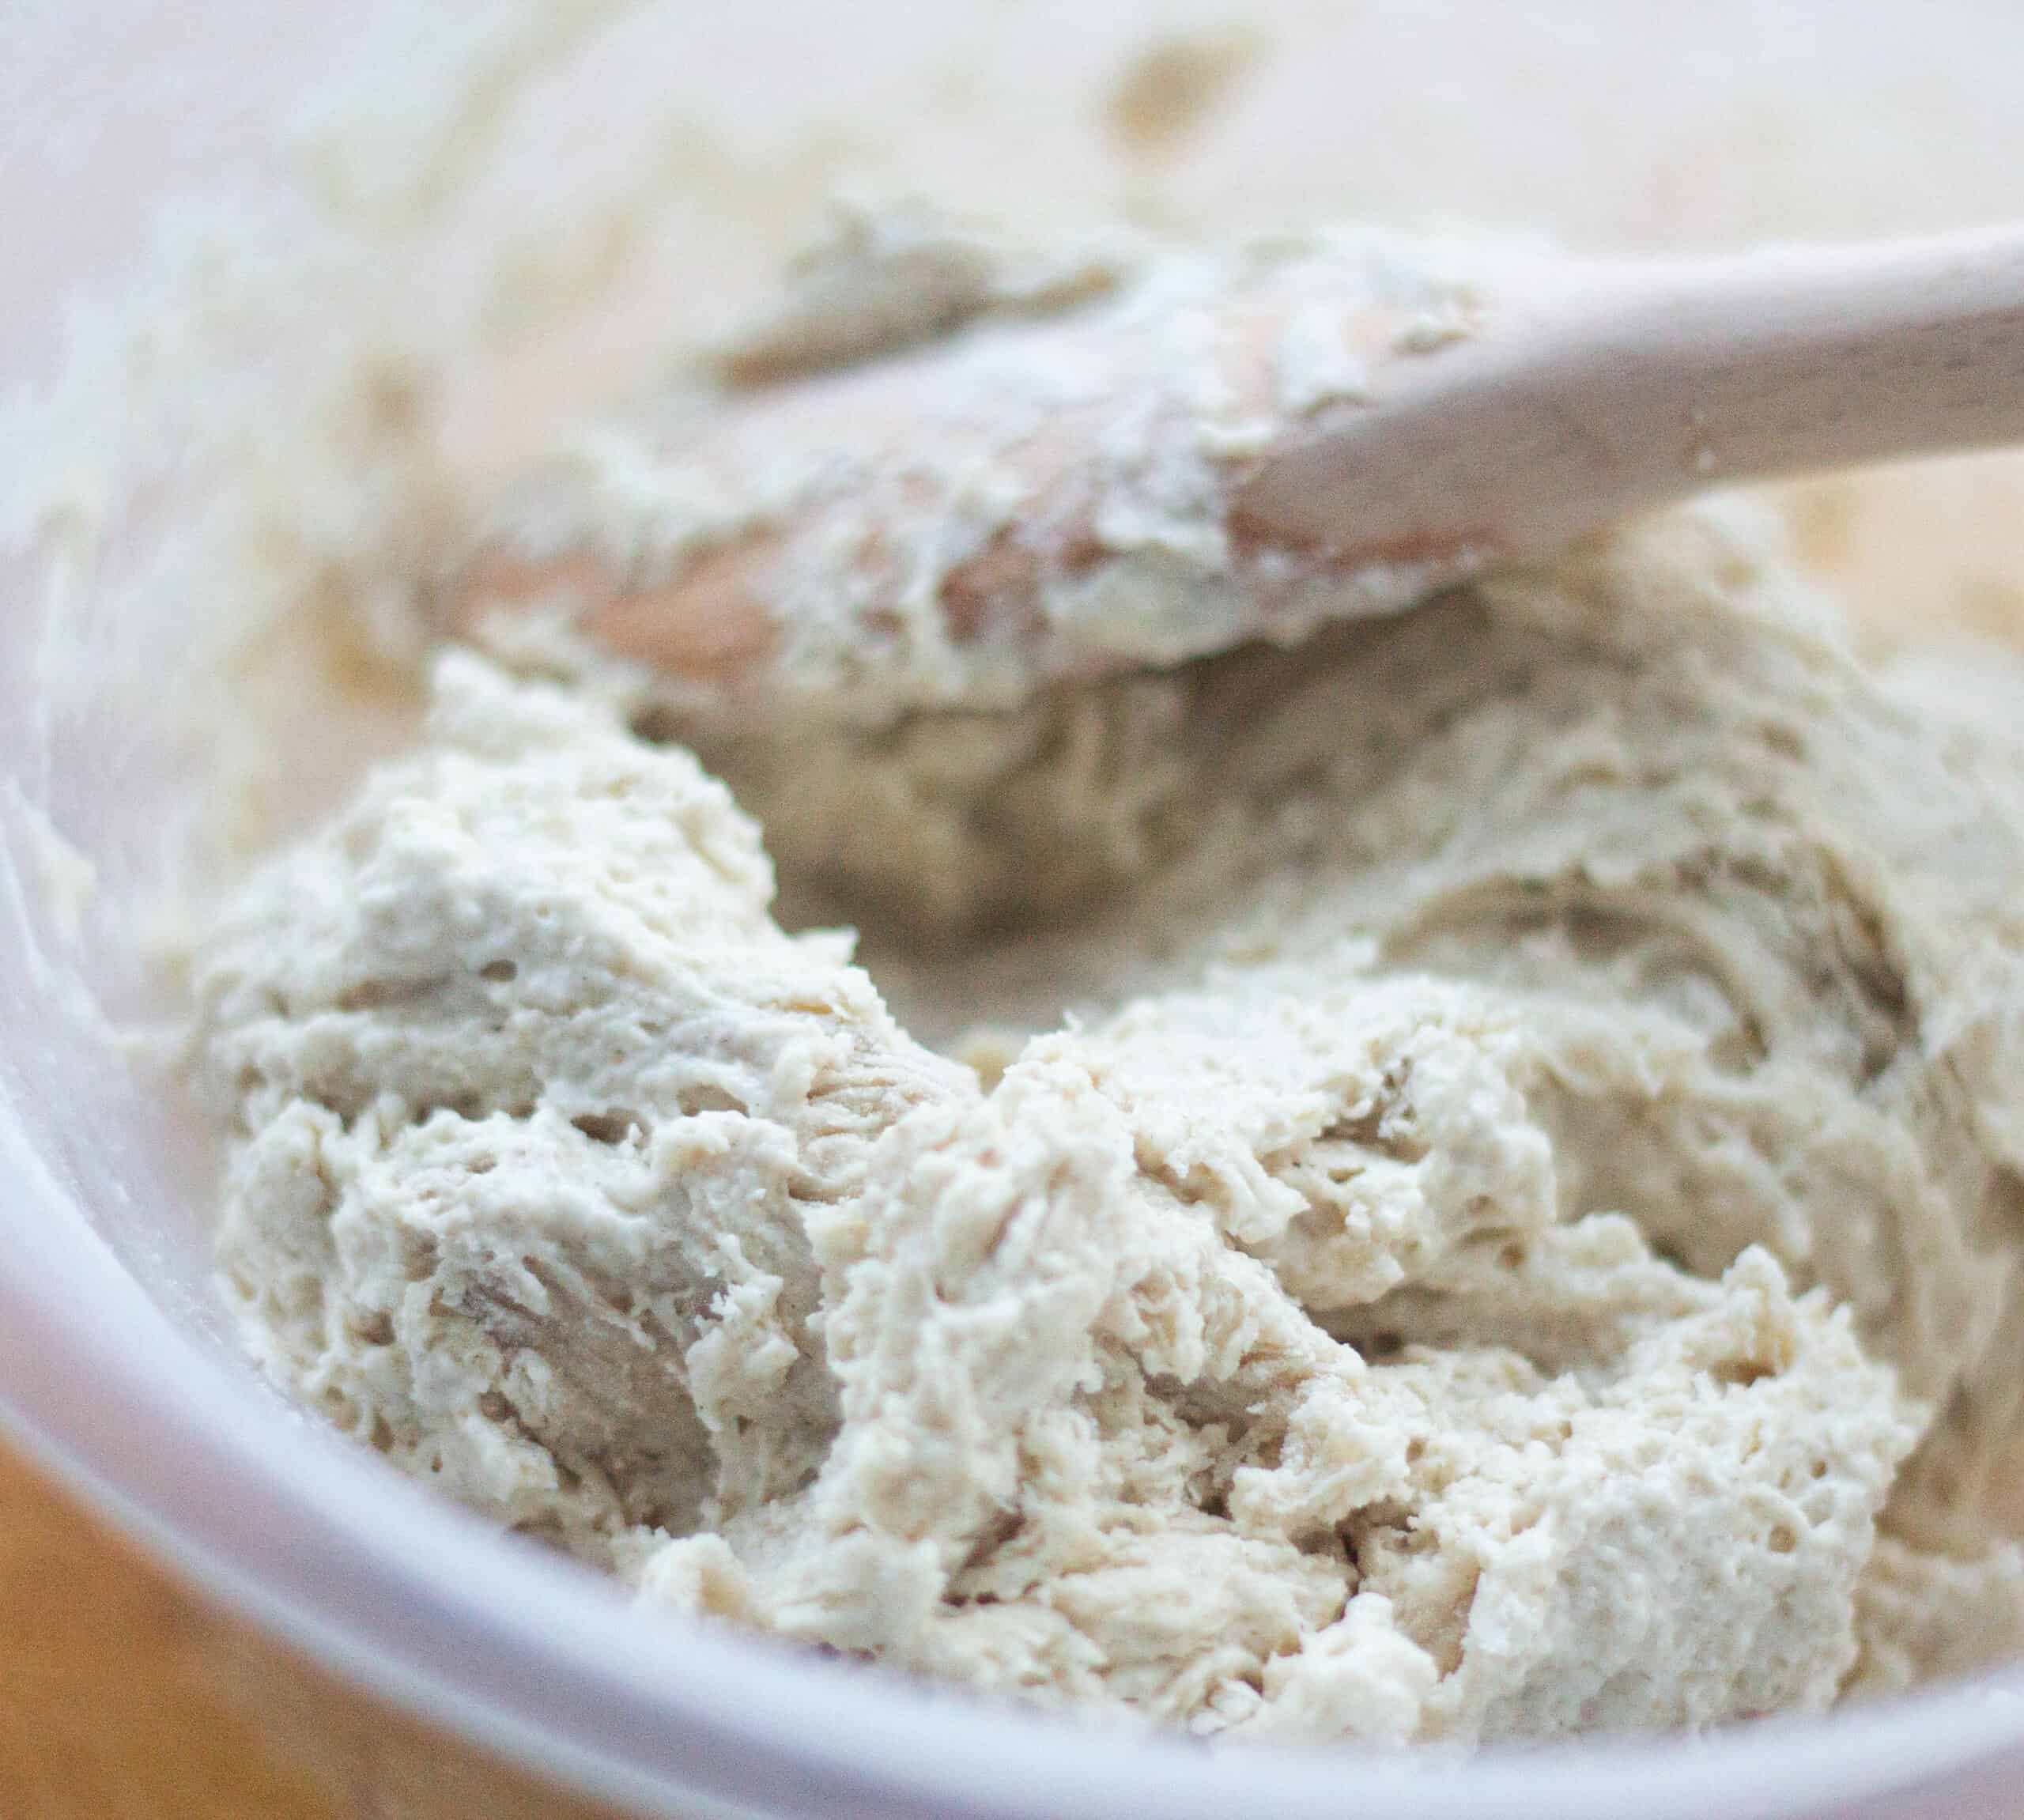 Mixing flour water and yeast until you have a rough dough